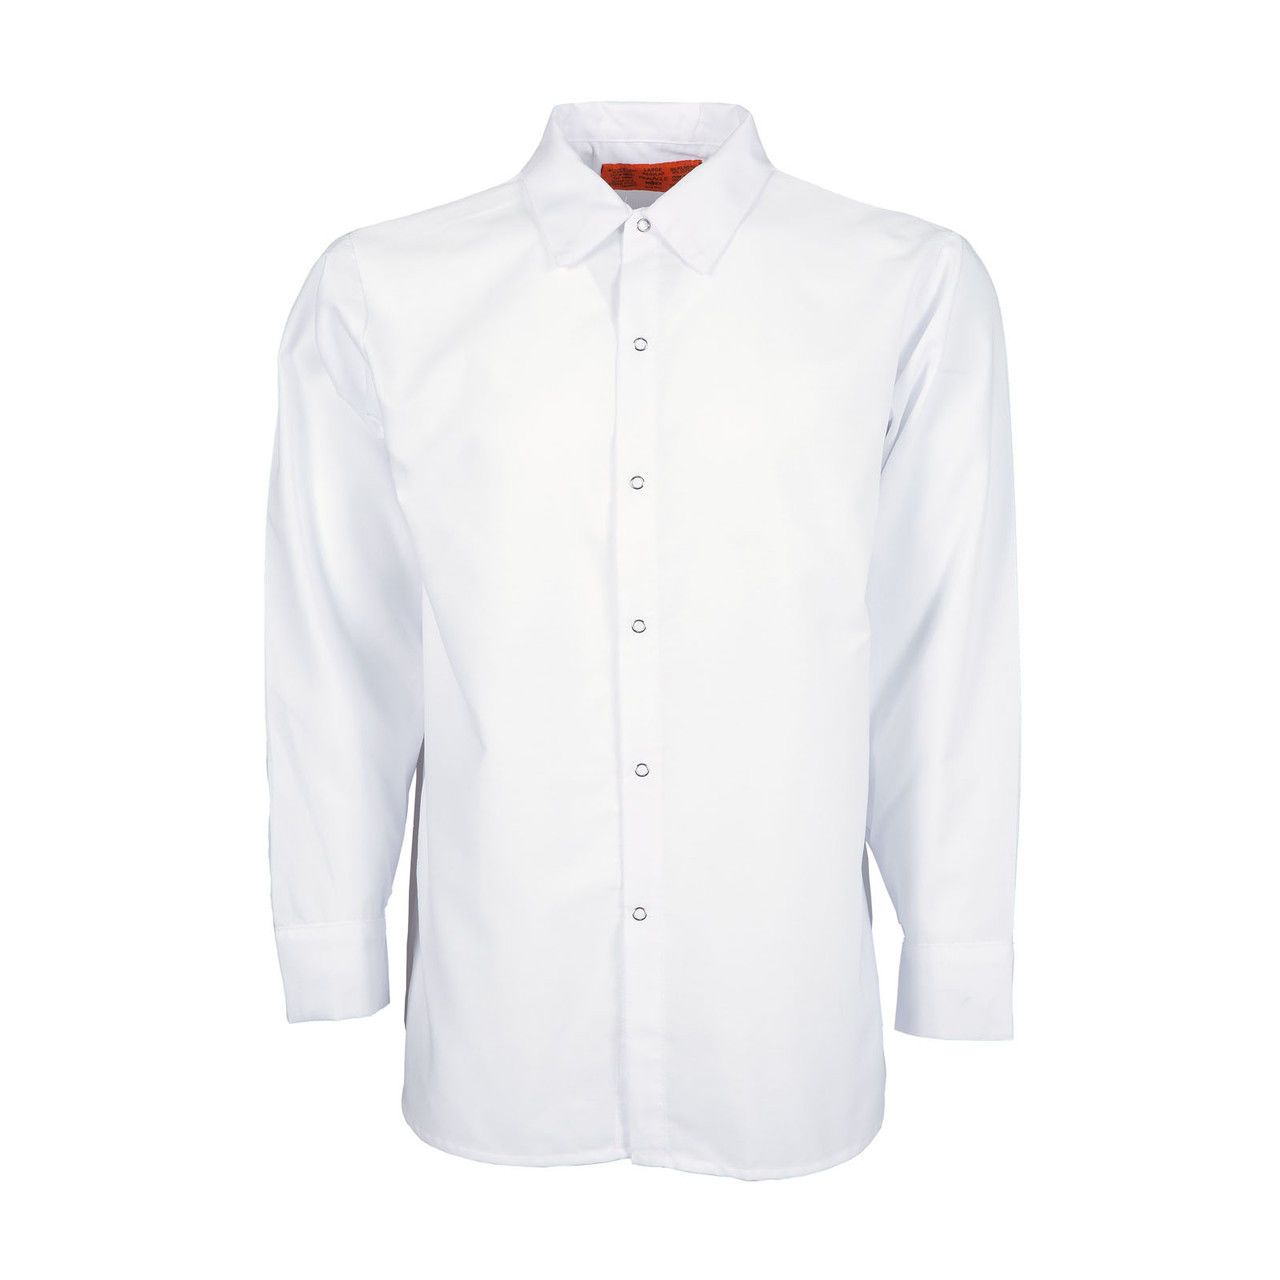 Where do the white work shirts mens ship from?